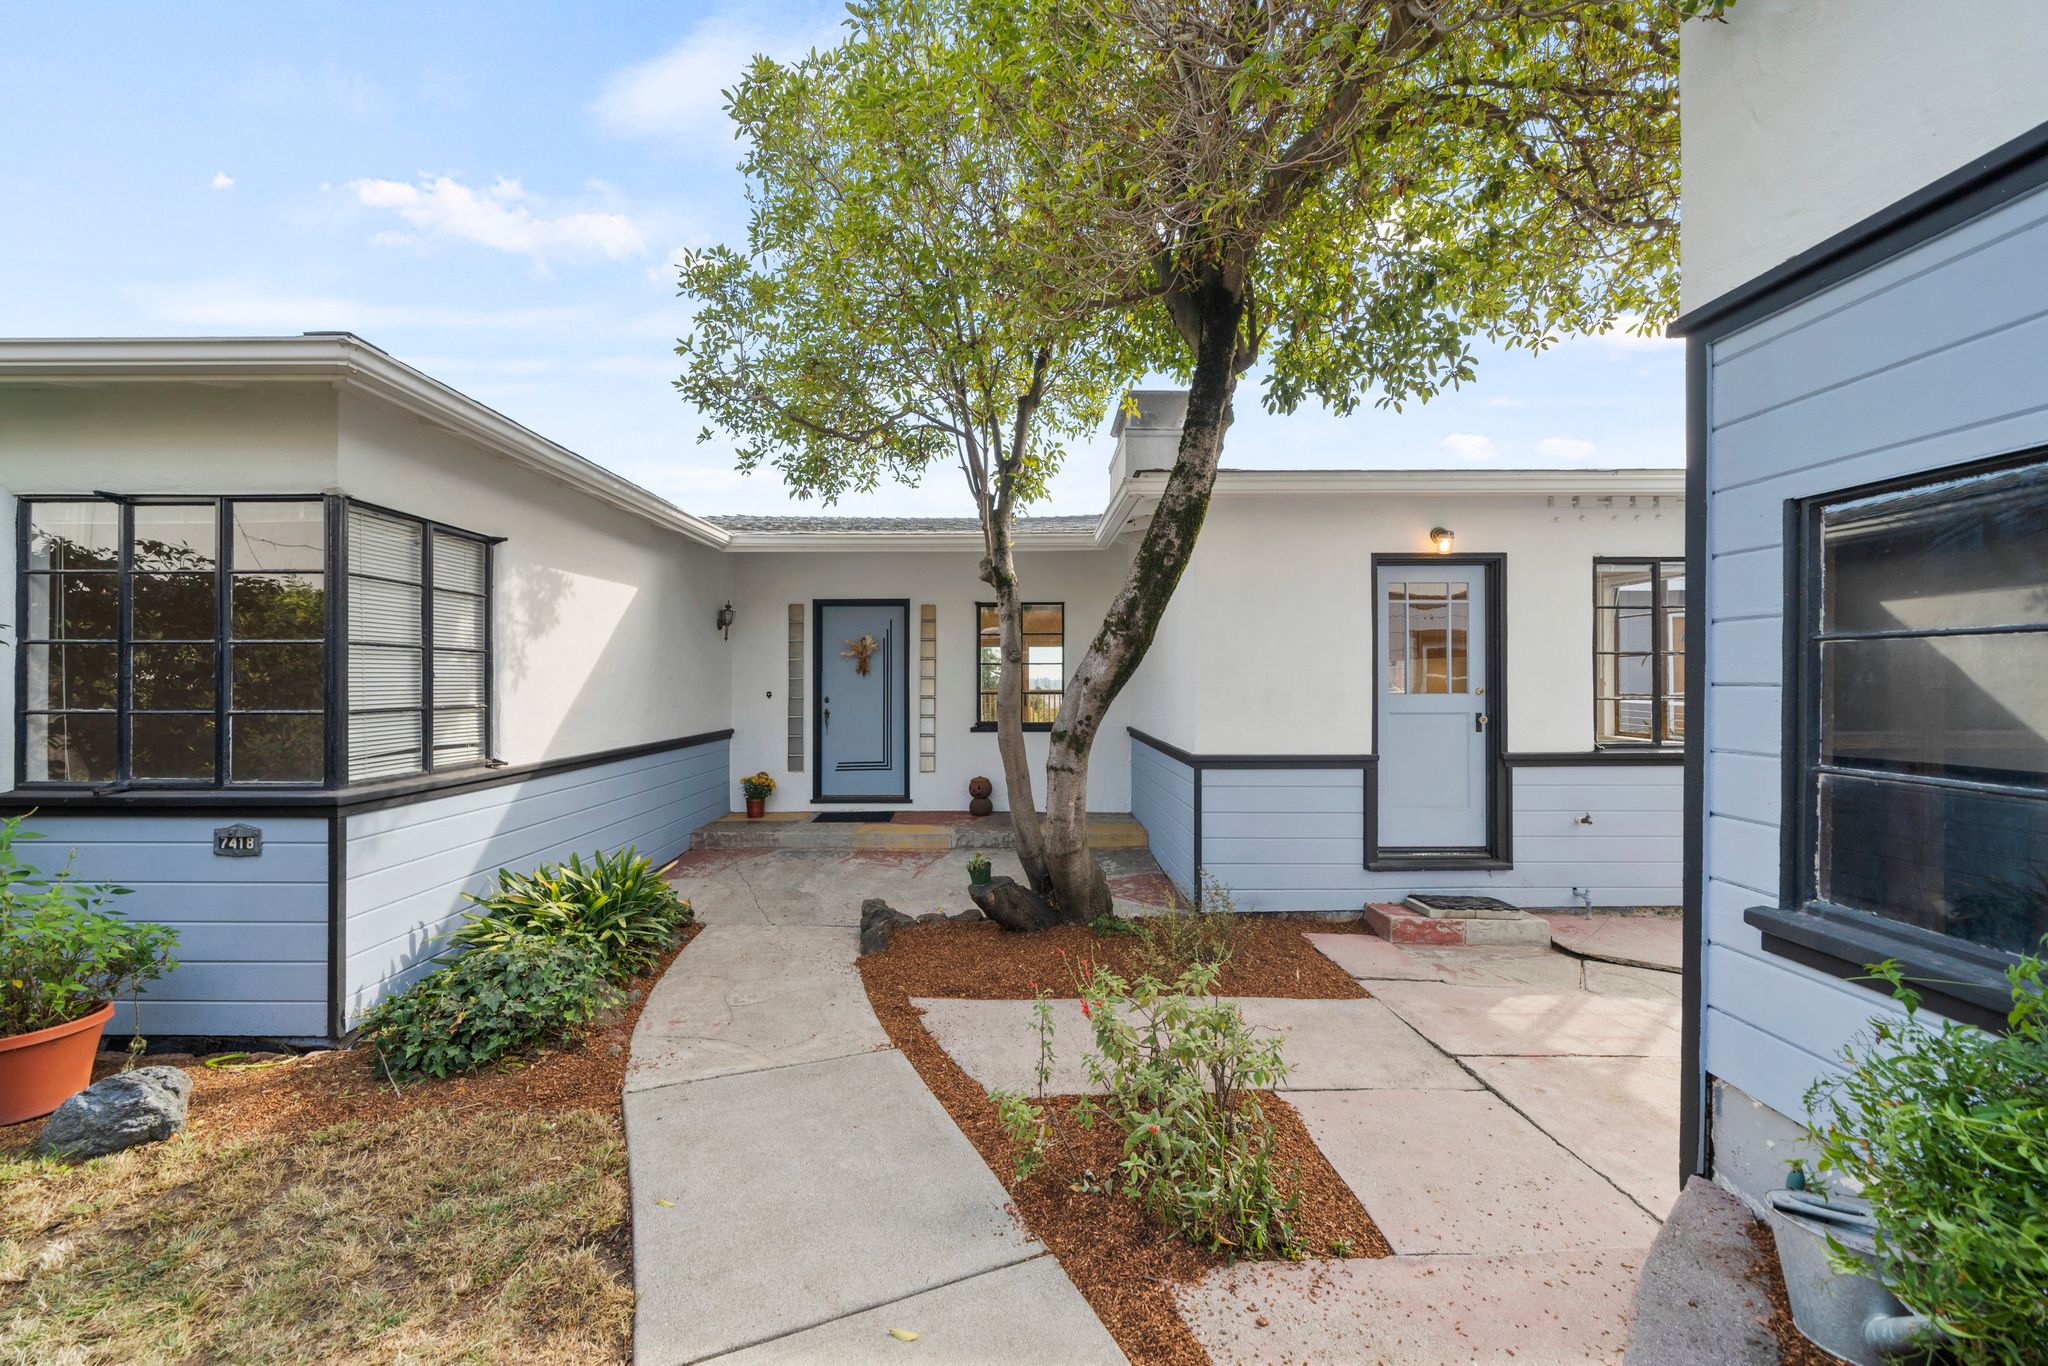 1425 9th Ave, Oakland - Properties 